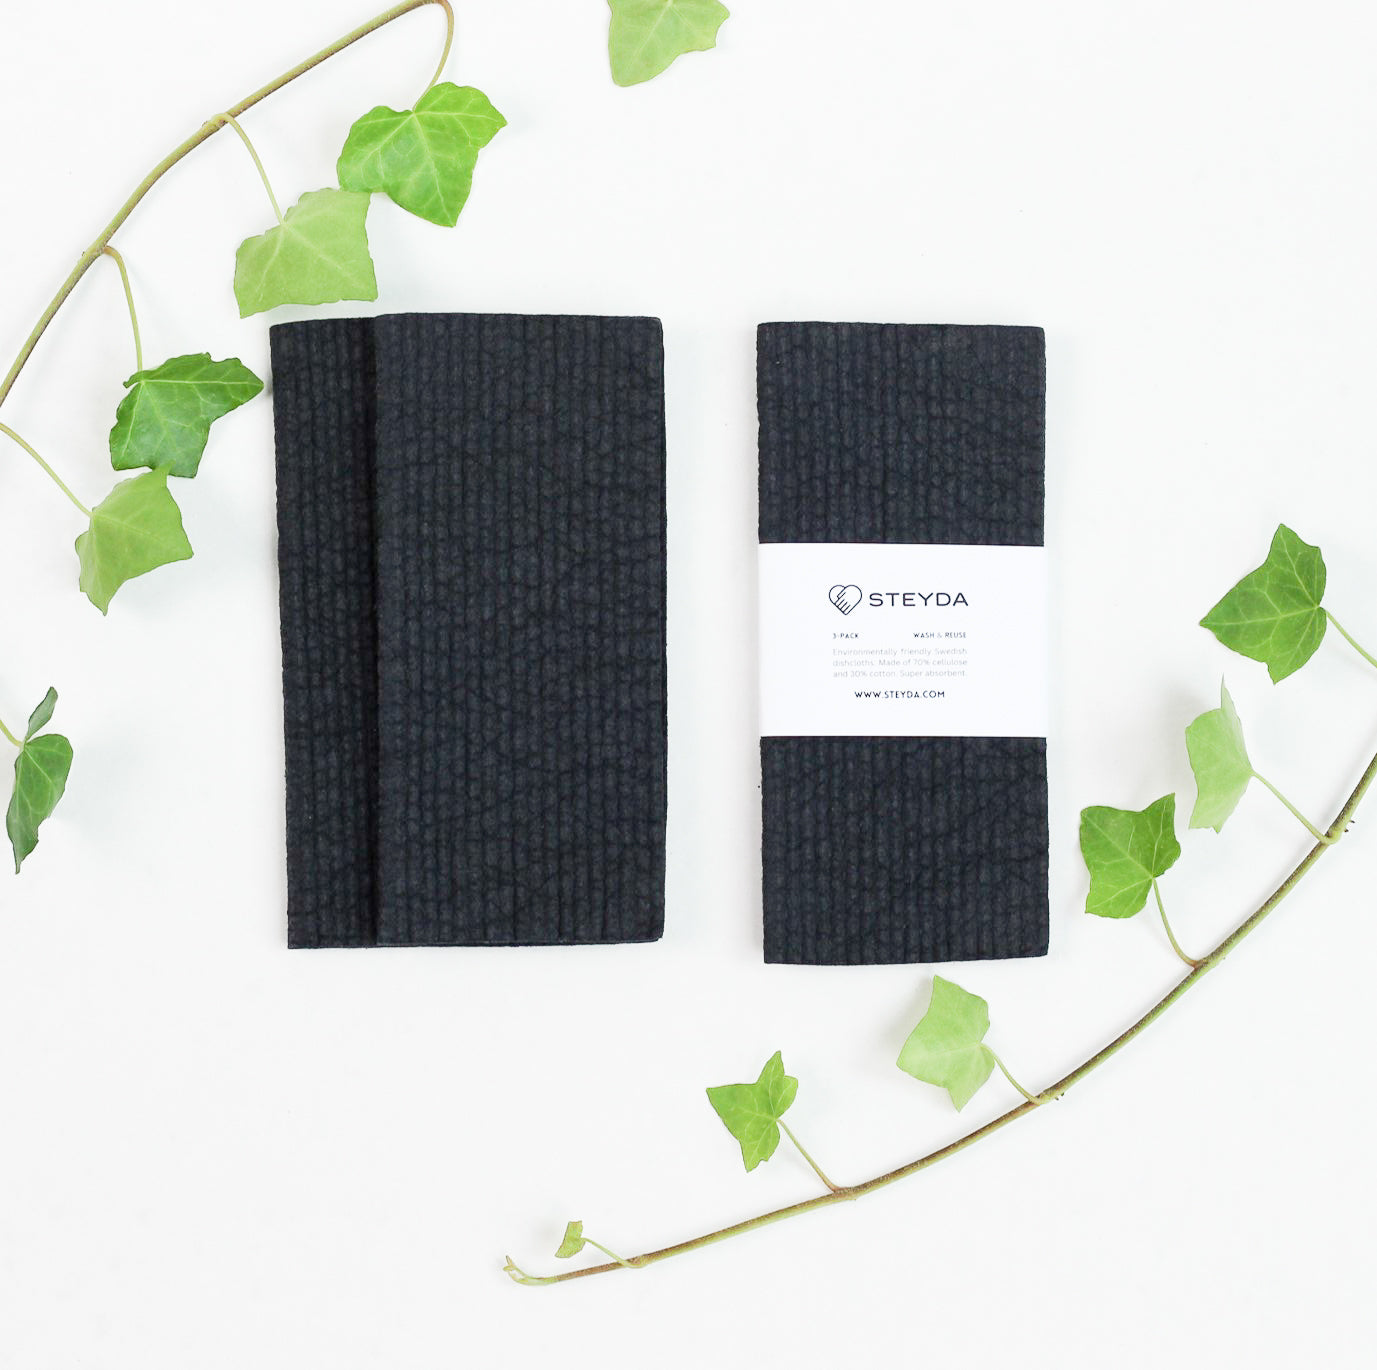 Swedish Dishcloths Reusable Compostable Alternative to Paper Towels